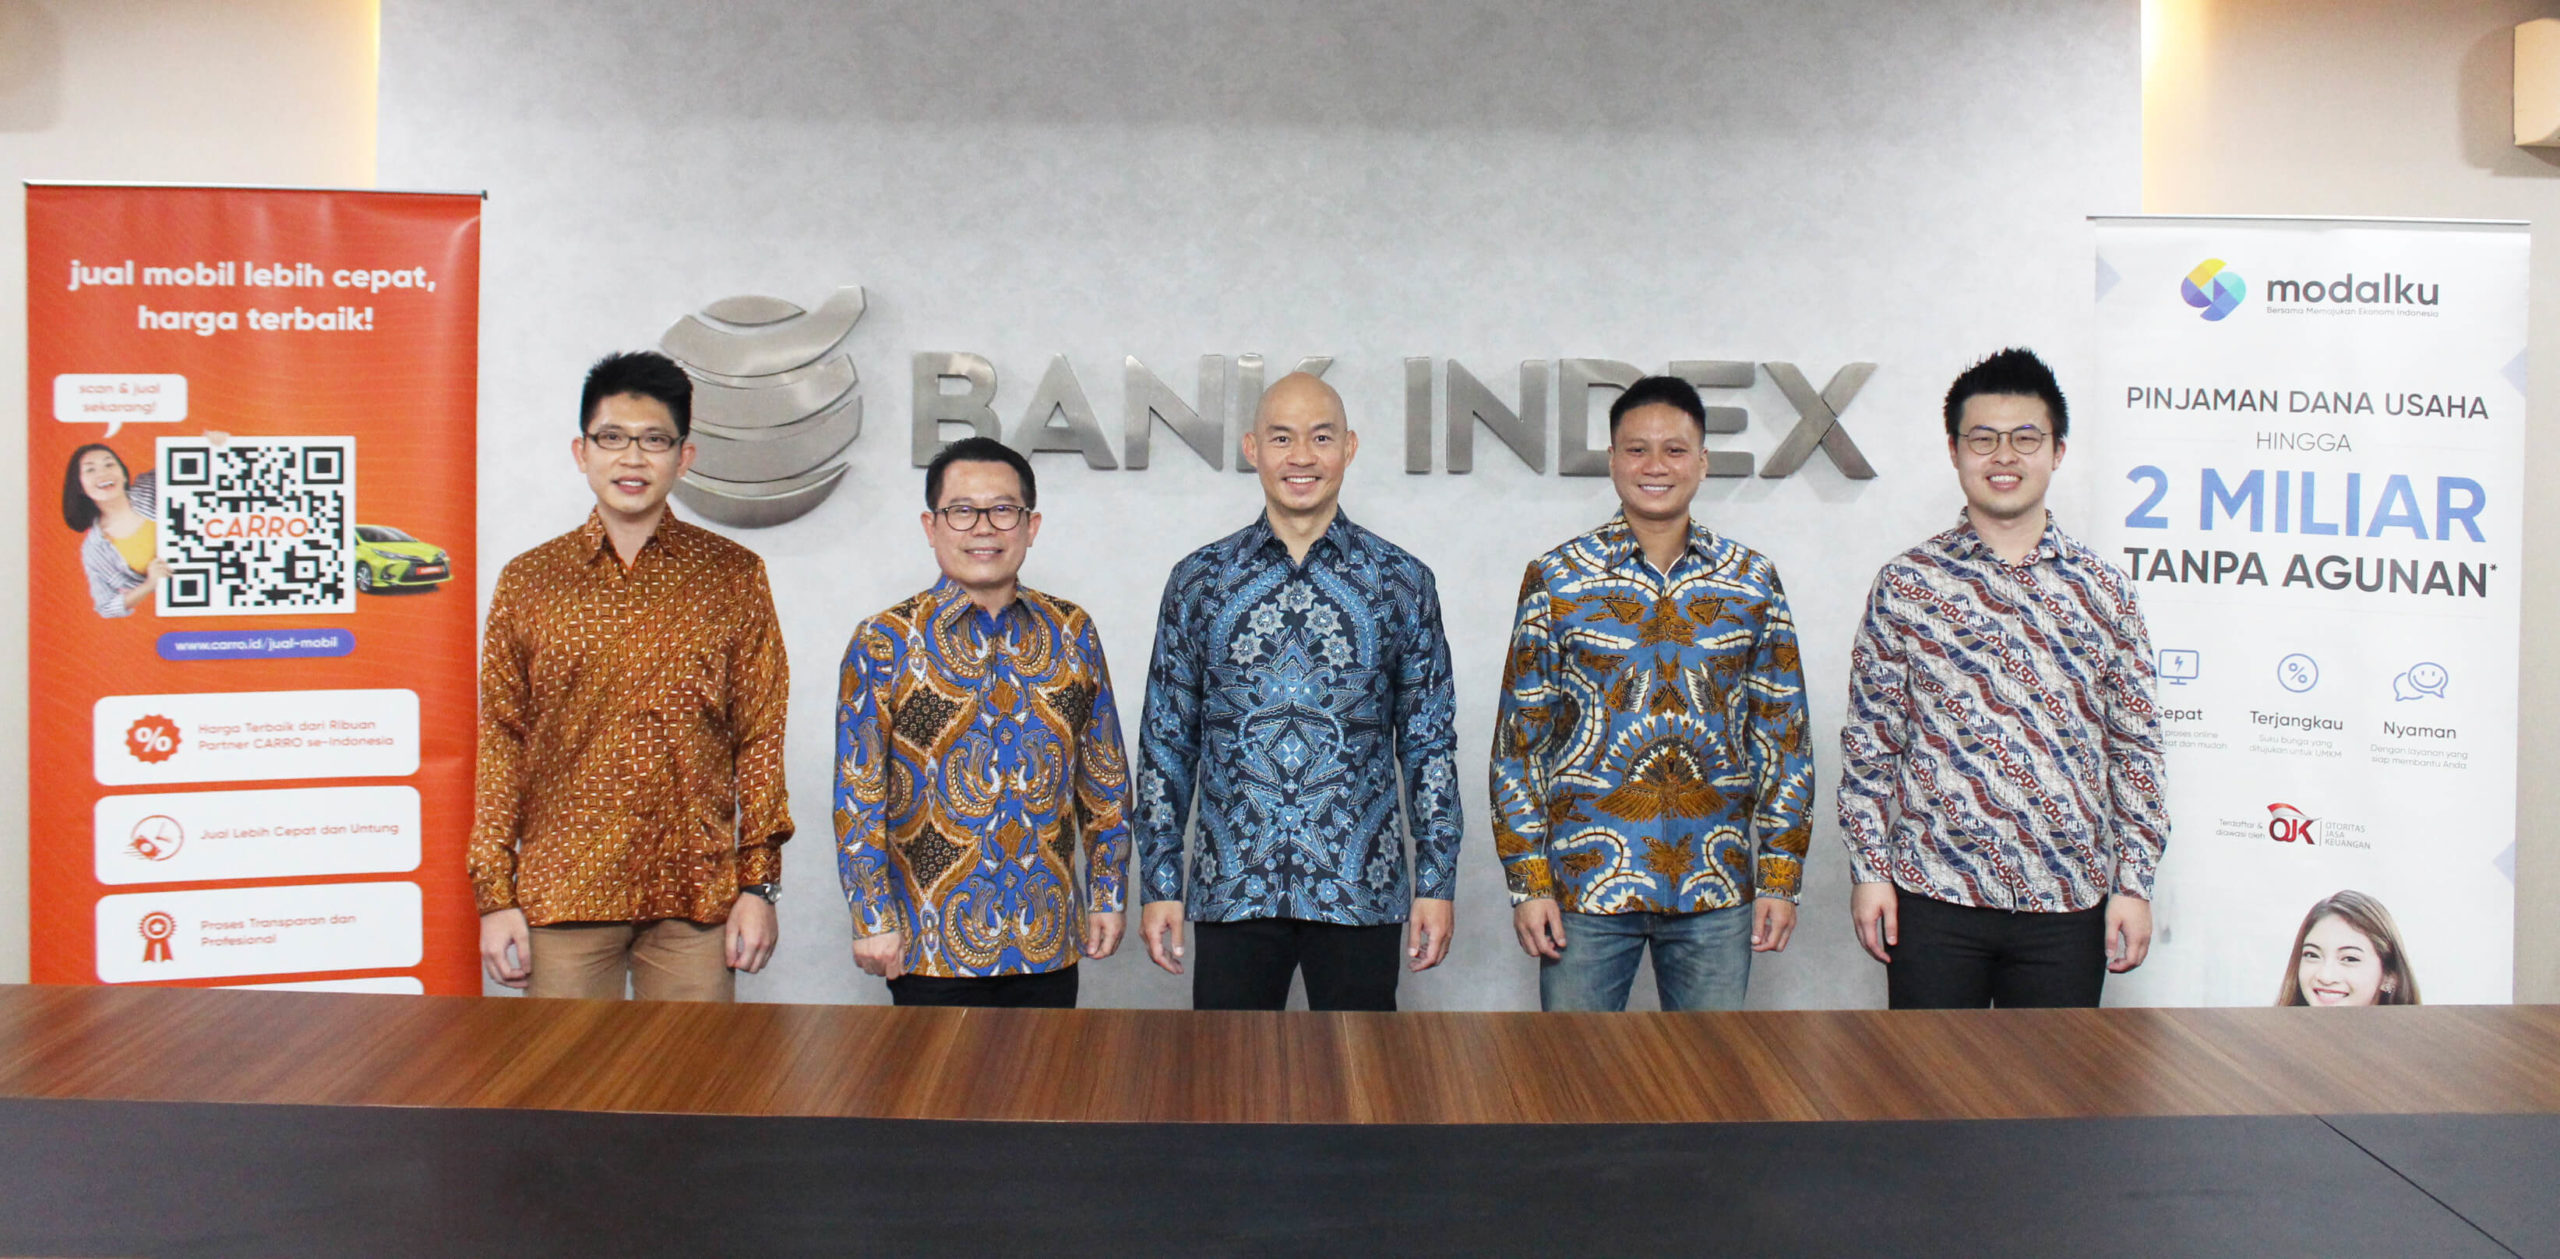 Modalku and Carro Announces “Co-Investment” to Bank Index